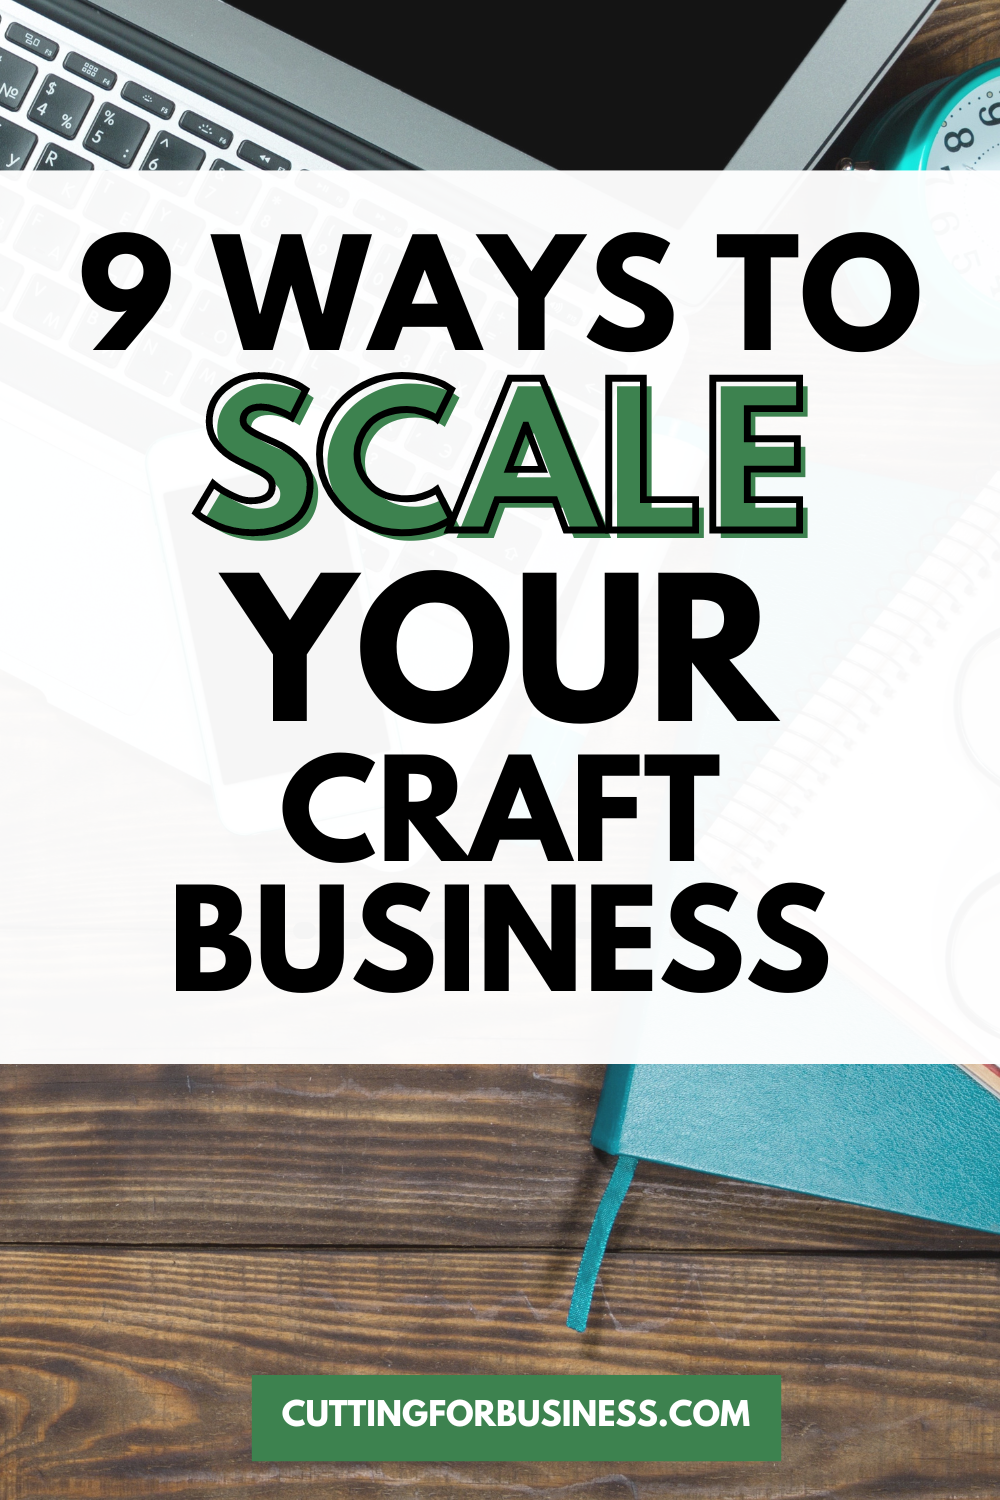 9 Ways to Scale Your Craft Business - by cuttingforbusiness.com.